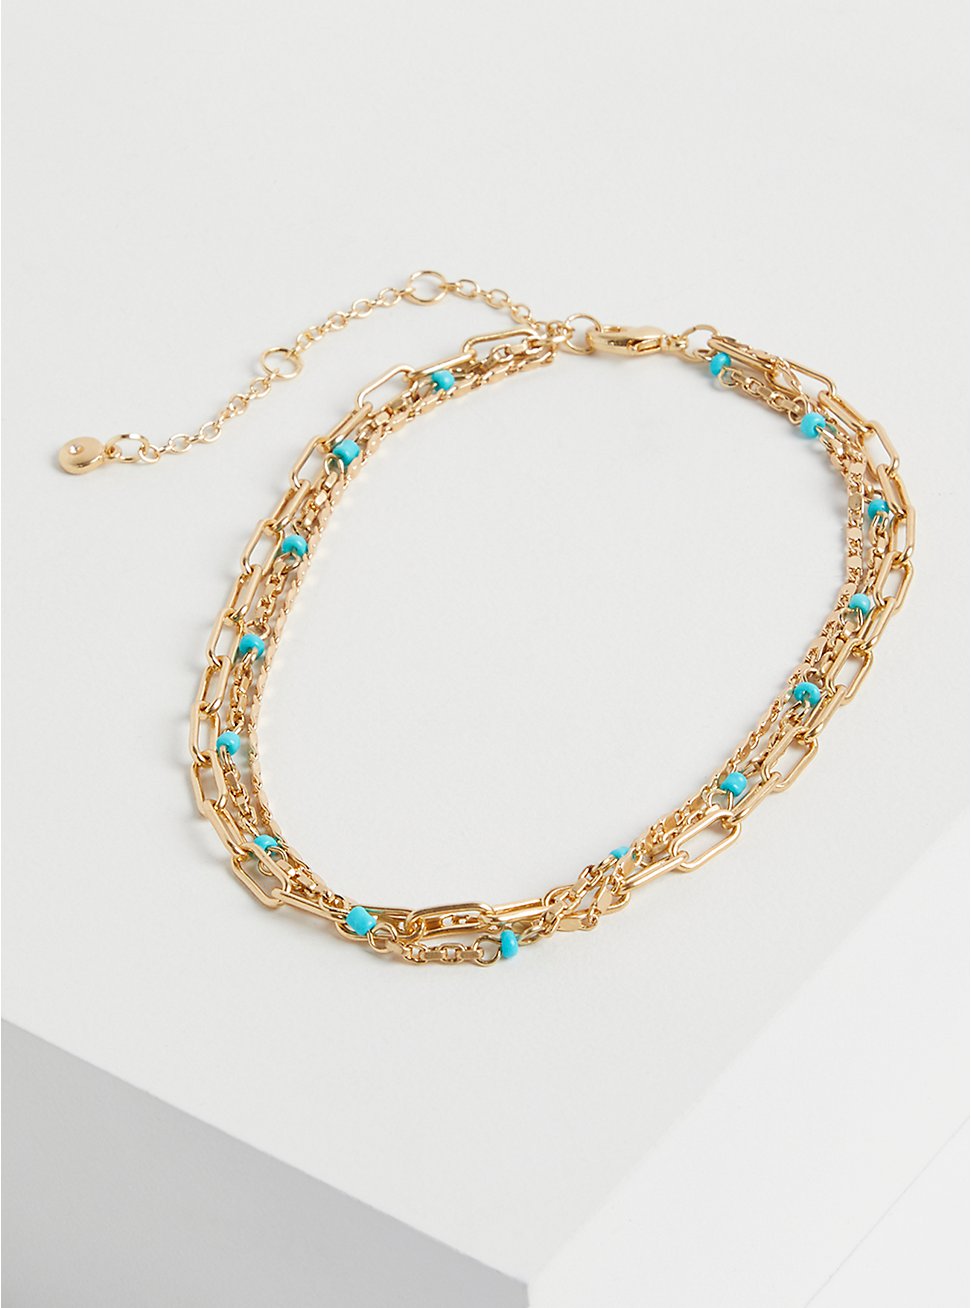 Plus Size Beaded Link Anklet - Gold Tone & Turquoise, , hi-res